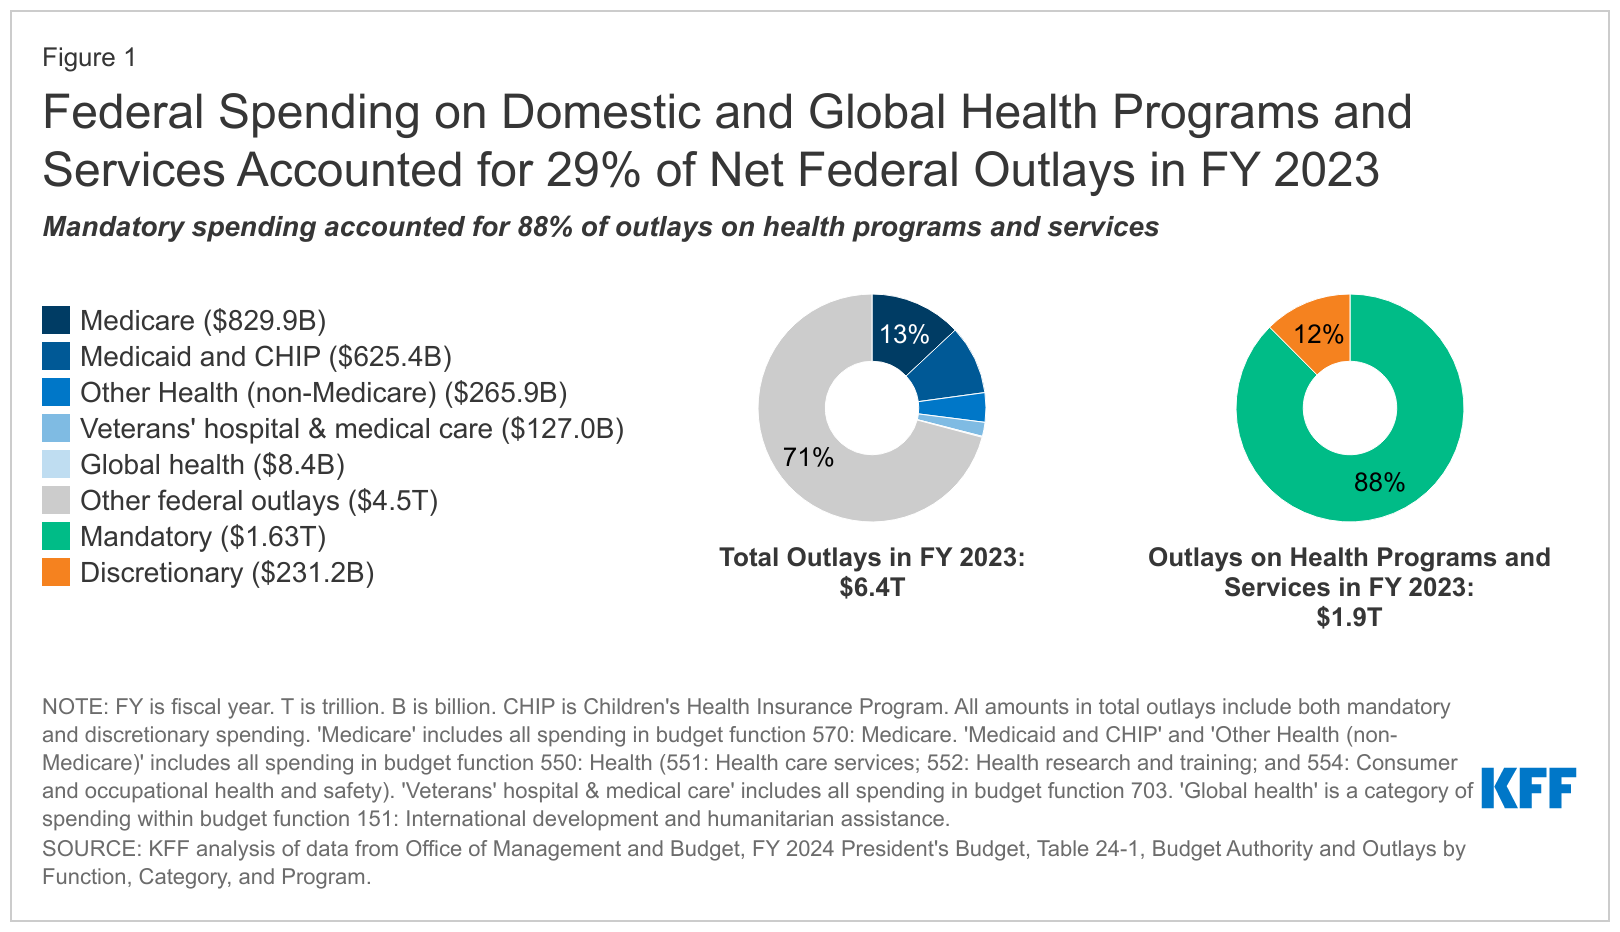 FAQs on Health Spending, the Federal Budget, and Budget Enforcement